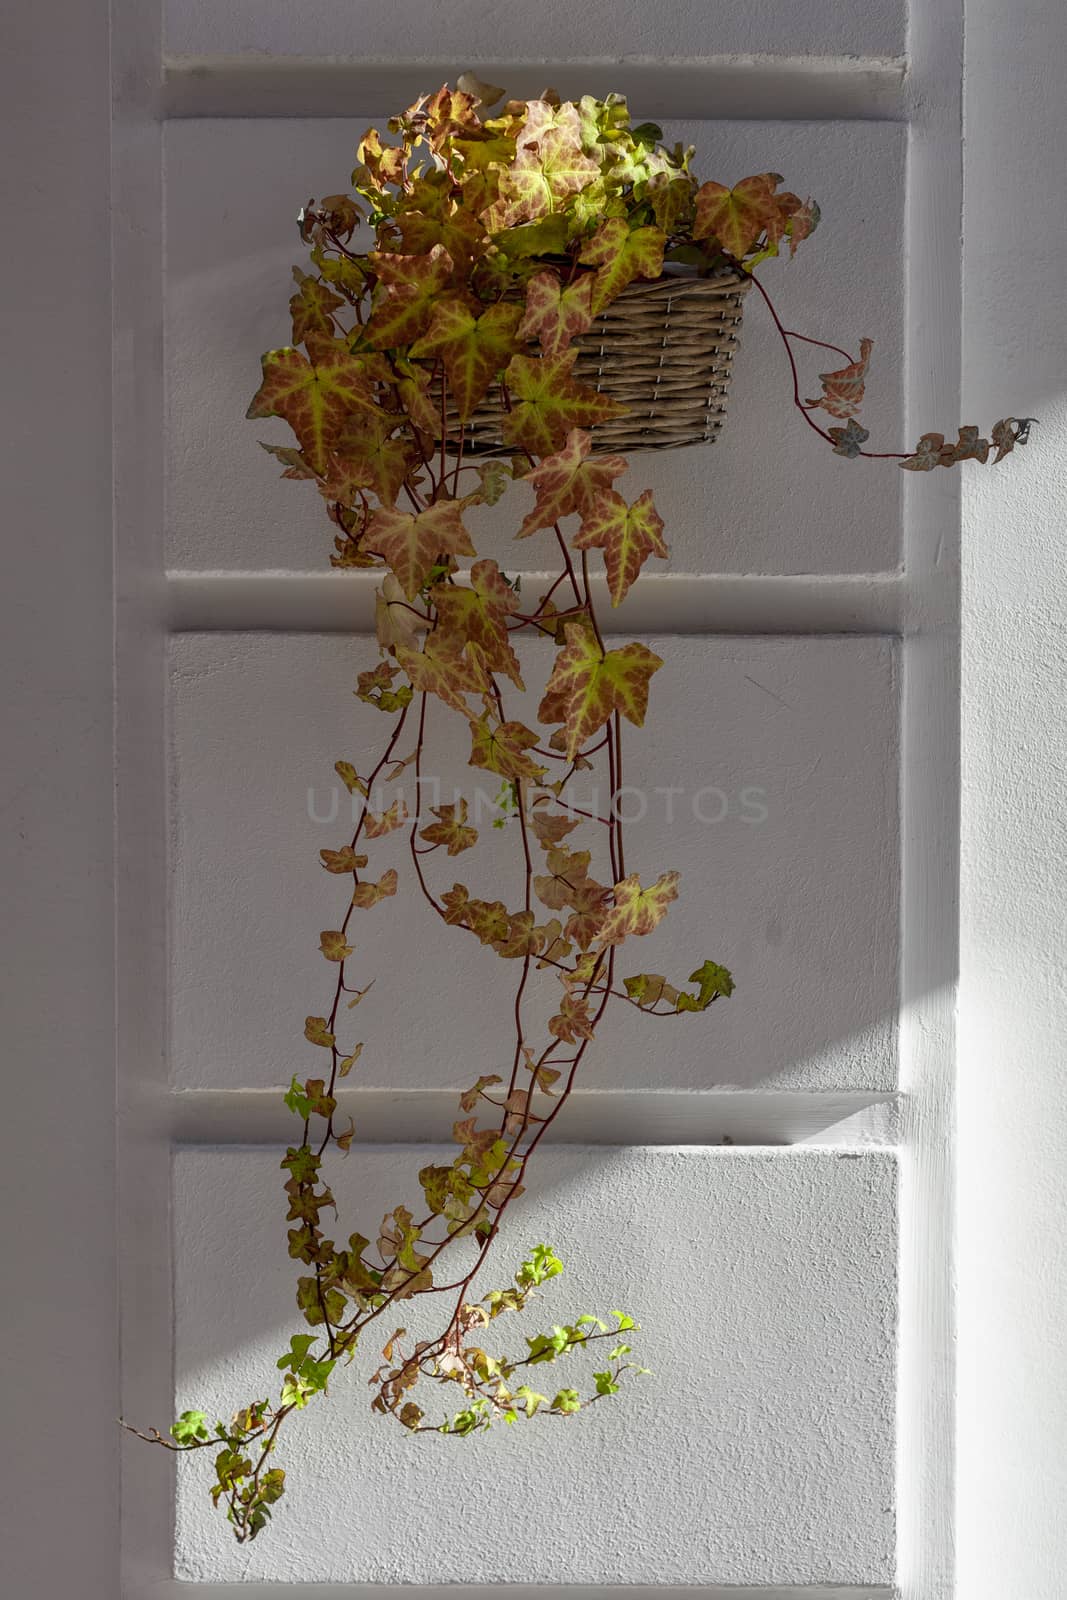 Basket with flowers hanging on a wall white light. A basket insi by Tjeerdkruse